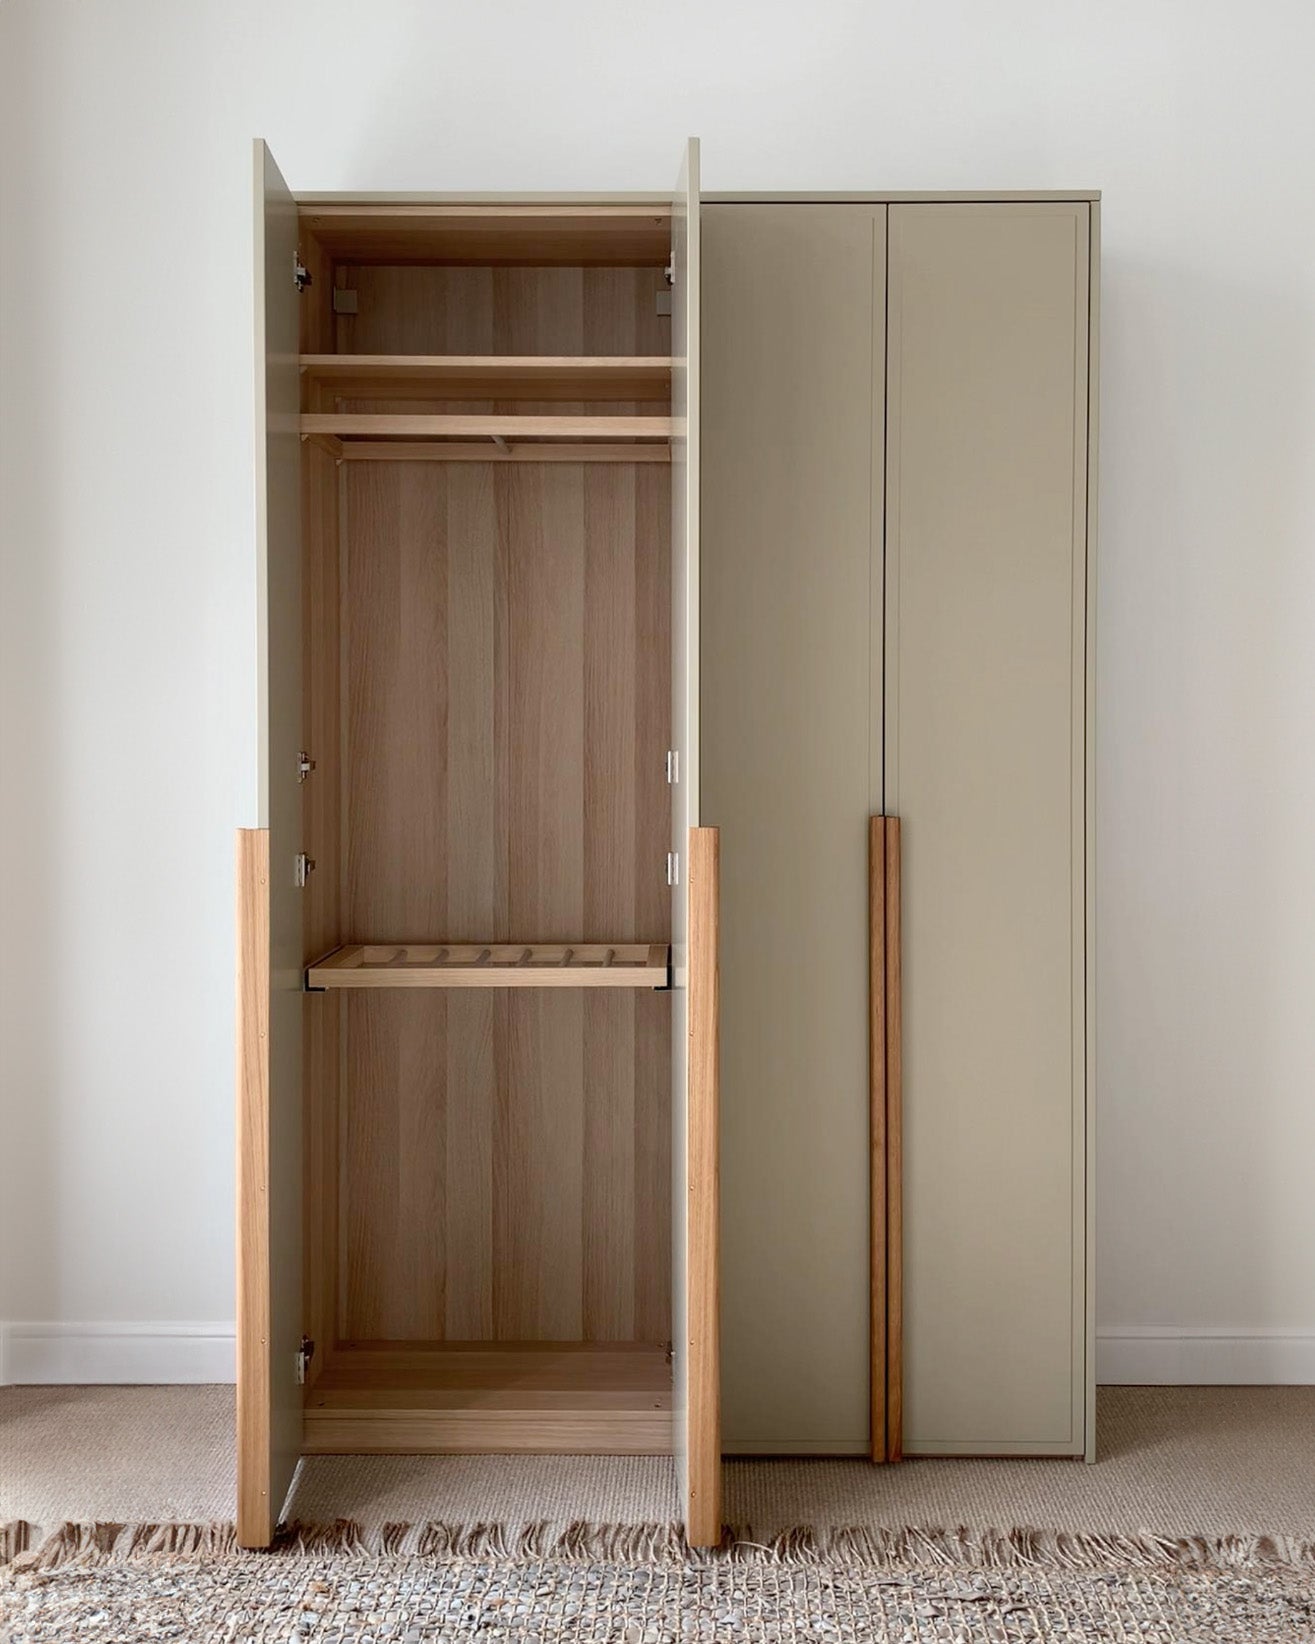 A.S.Helsingö Lalax wardrobe in ash green colour with open doors and Ikea pax frame inside